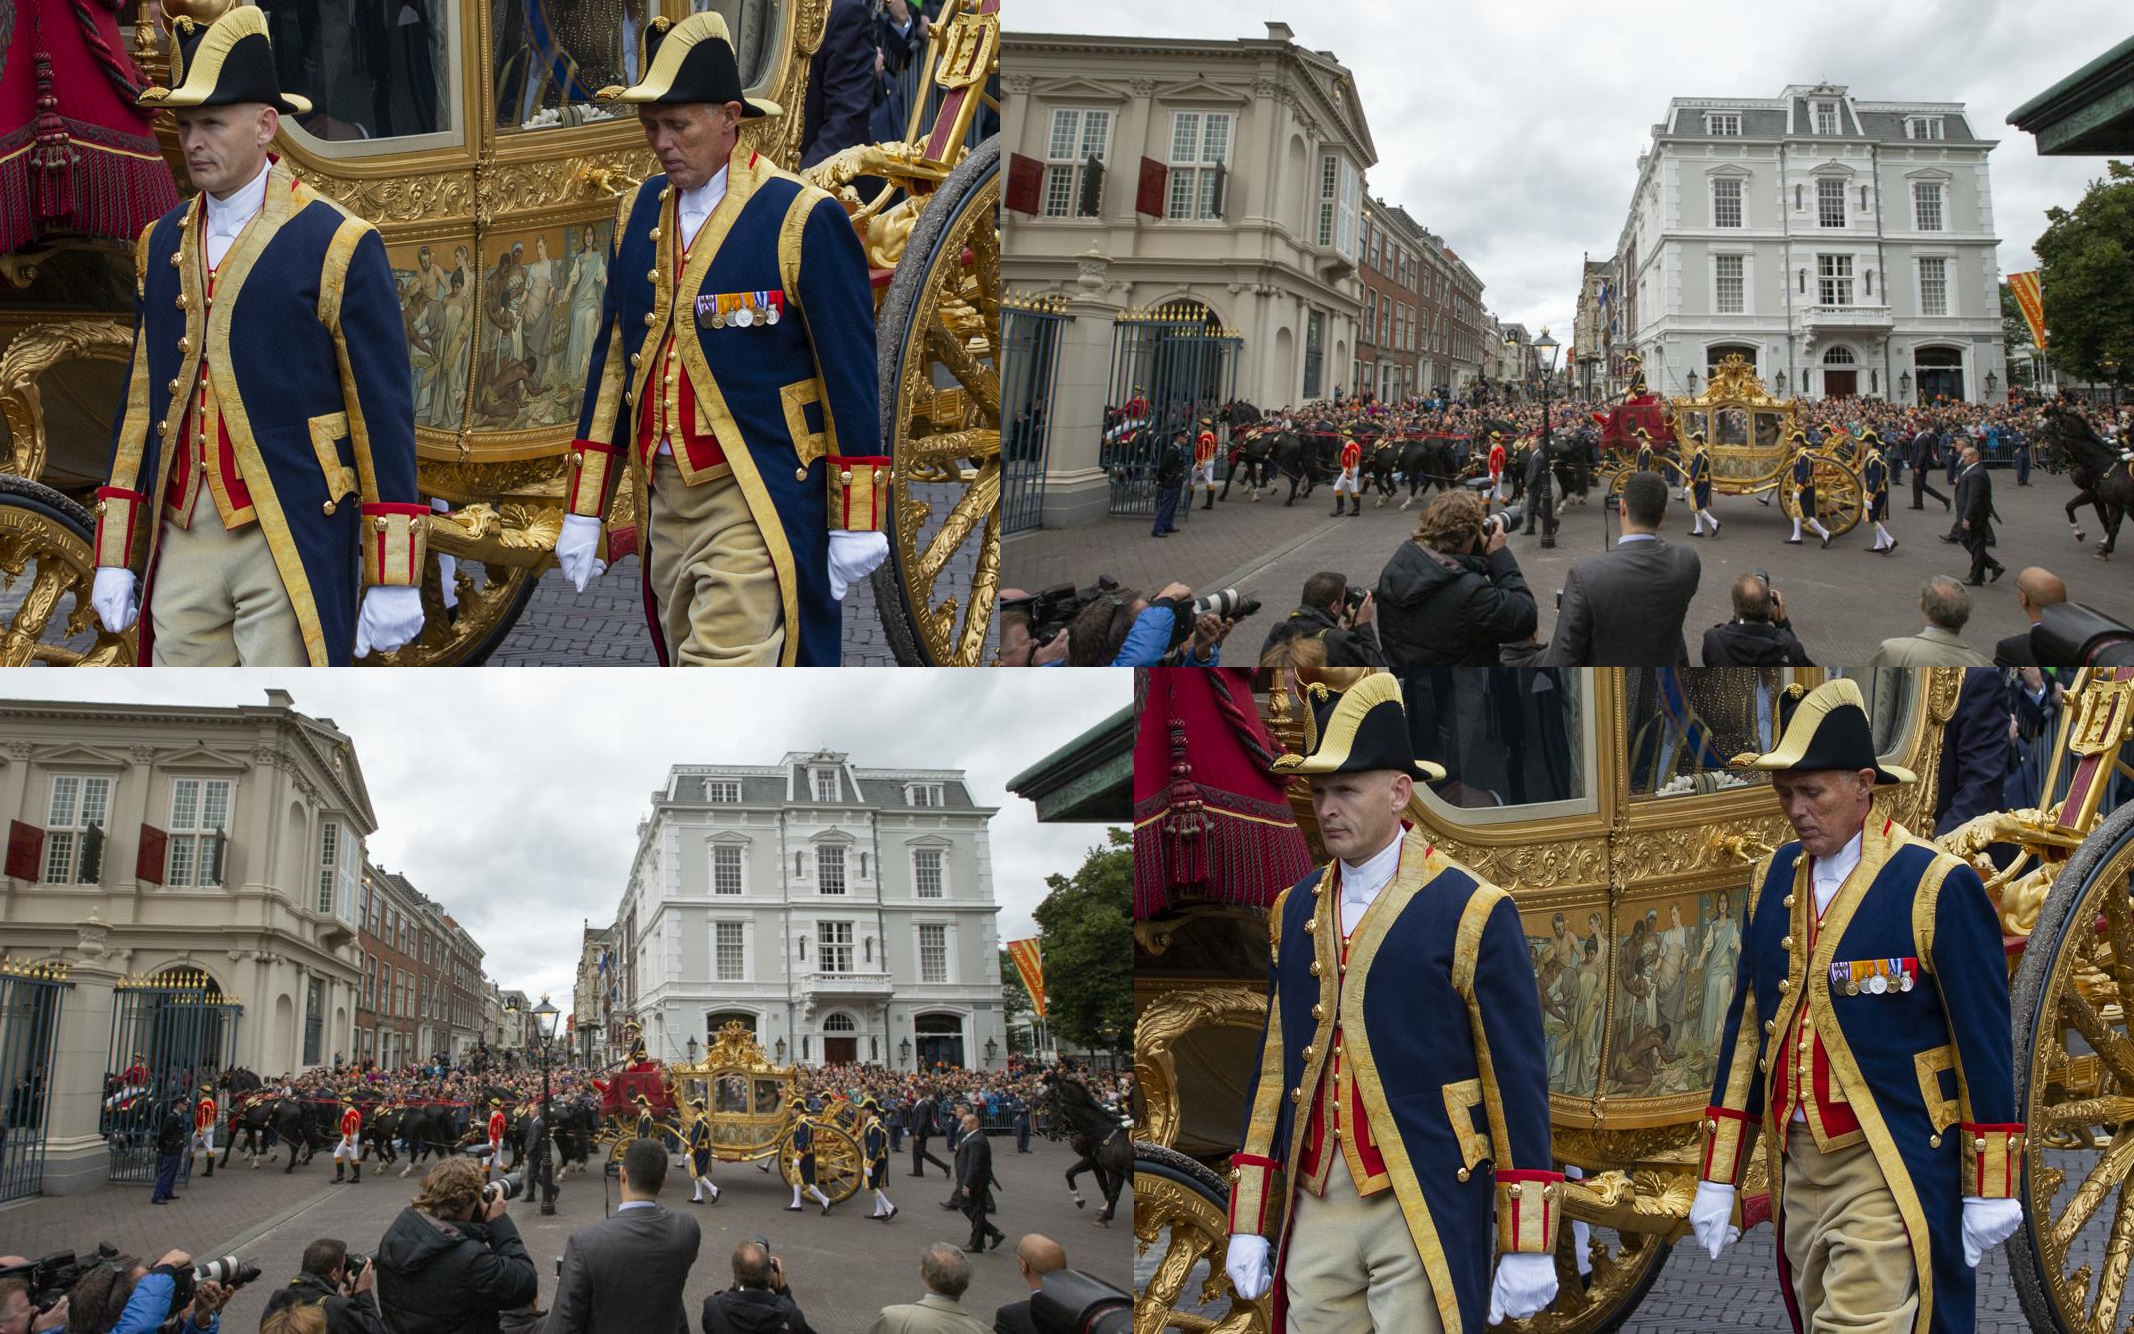 Netherlands King Losing The Carriage After Criticisms About The Dutch Colonial Past